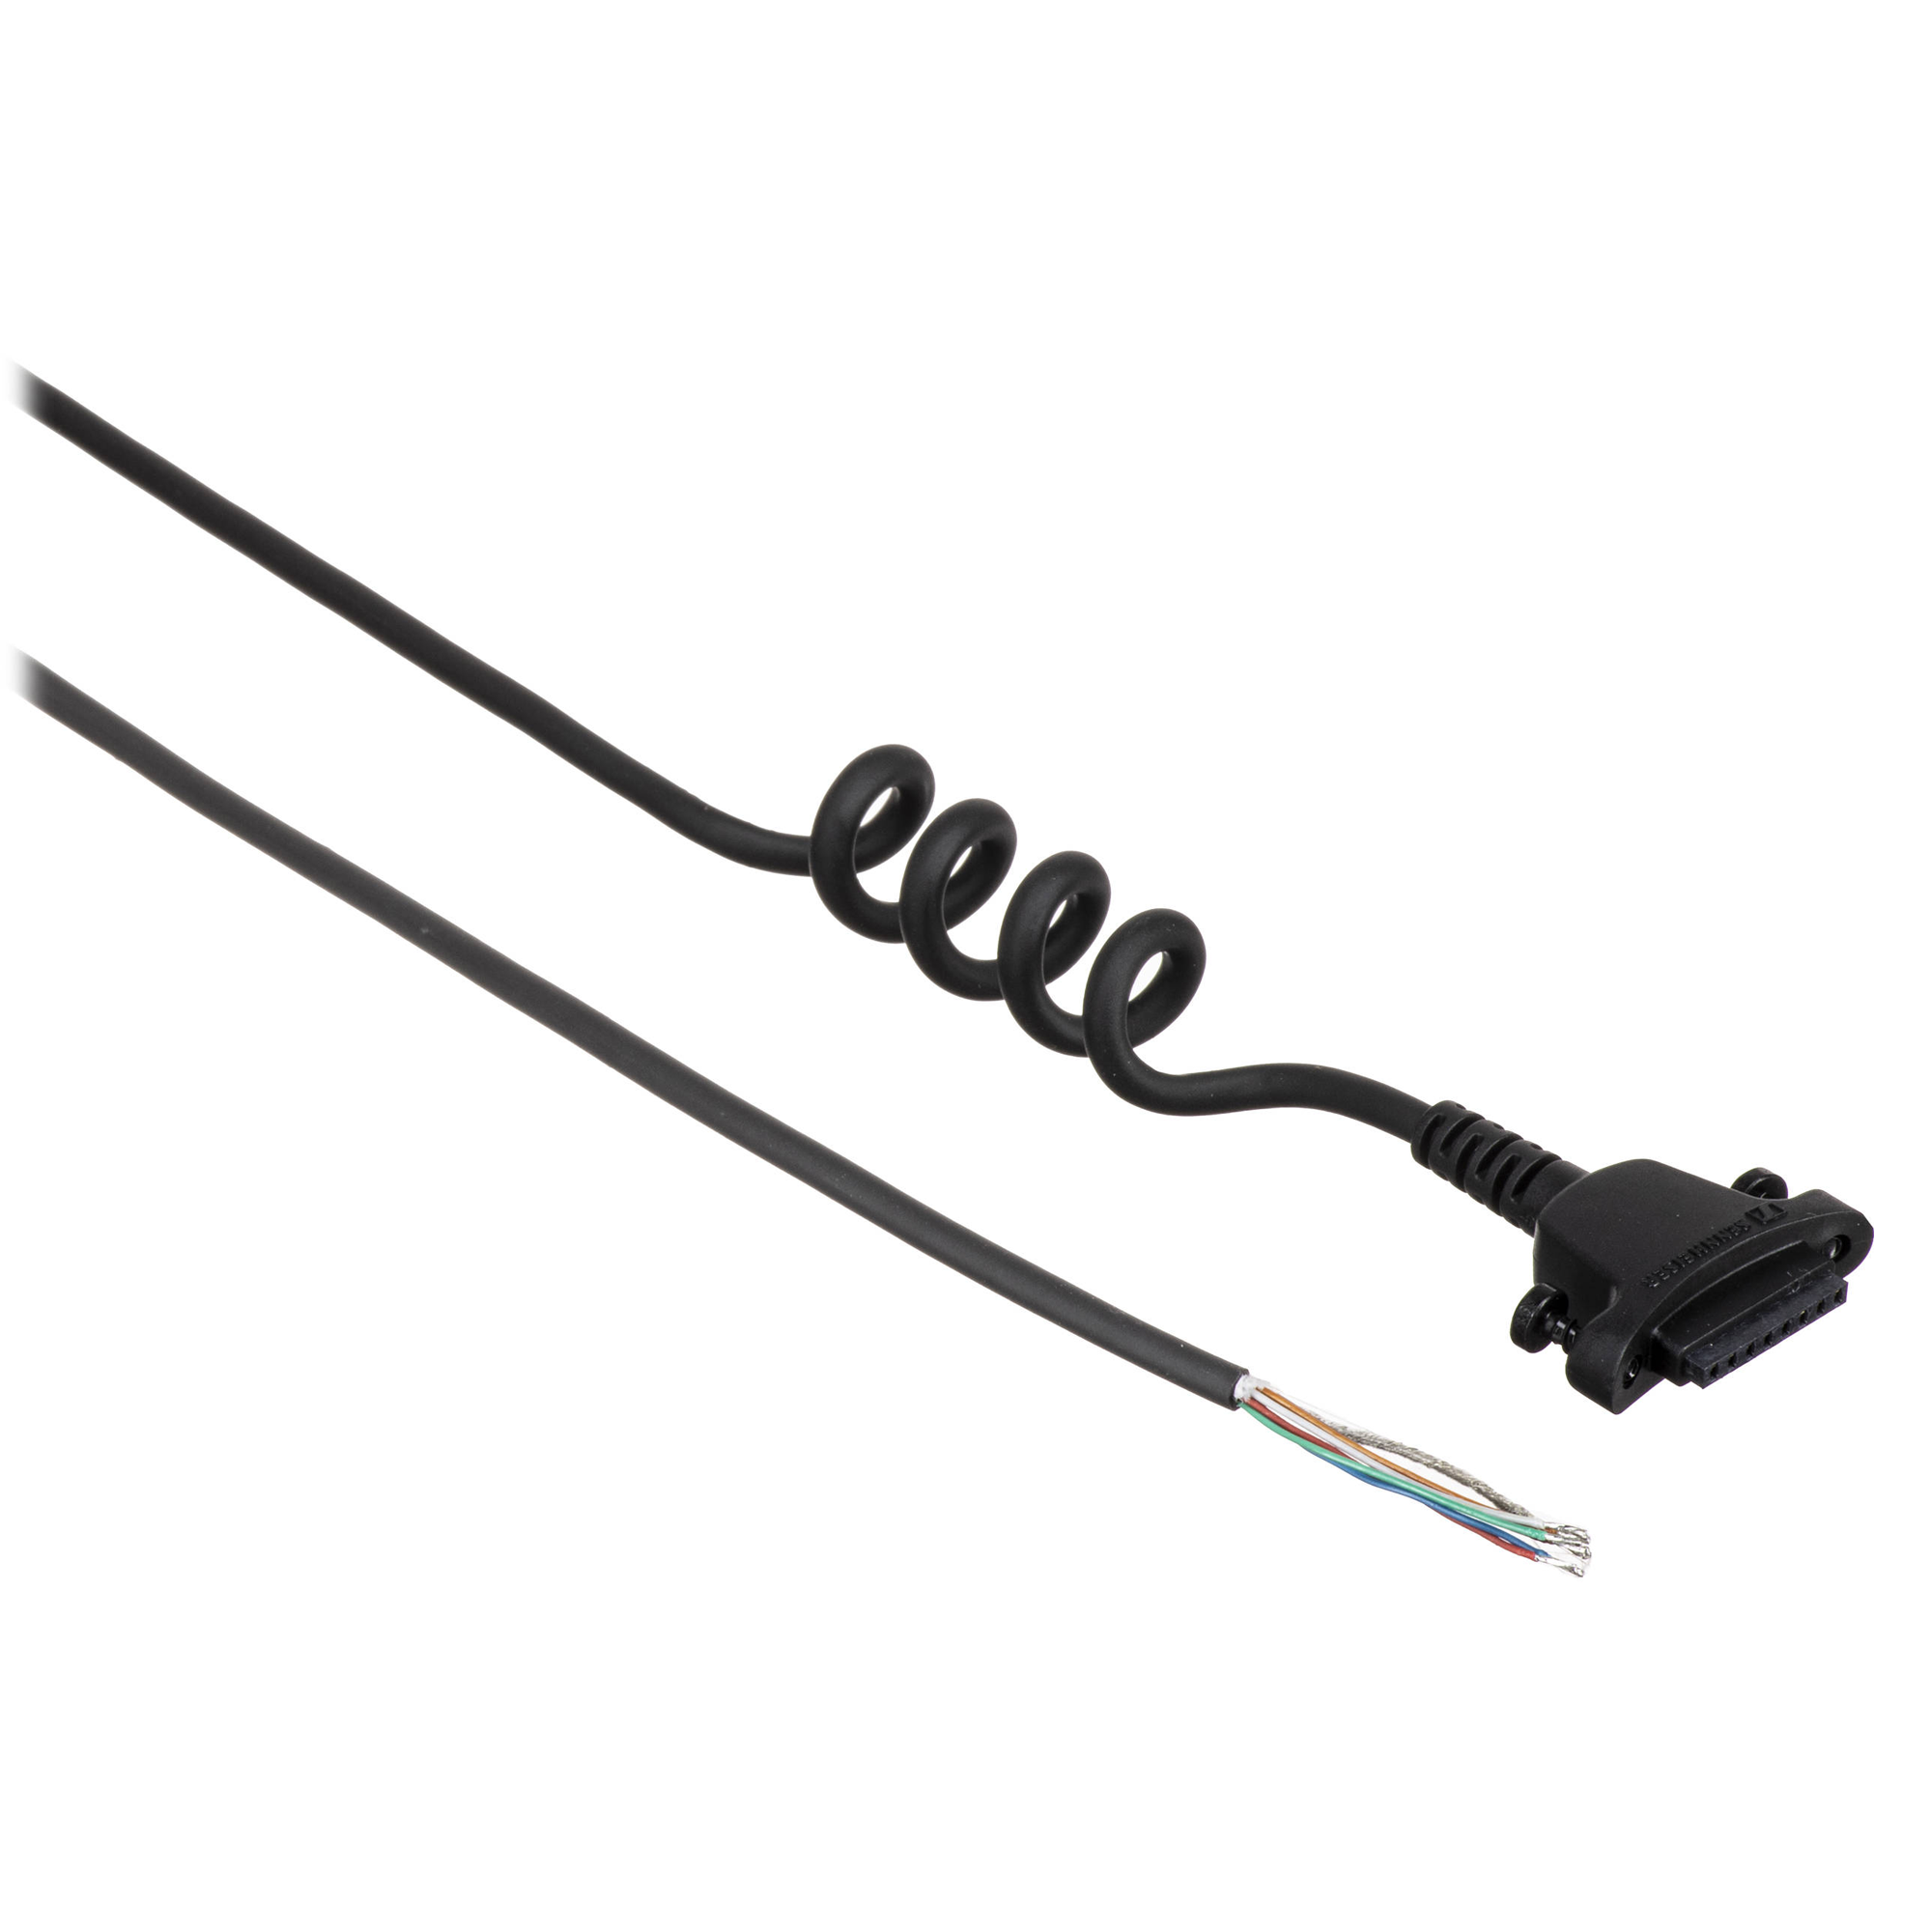 Sennheiser CABLE II-6 Copper Cable for ATC/Broadcast, 1.85m, Open-ended, Improved Durability